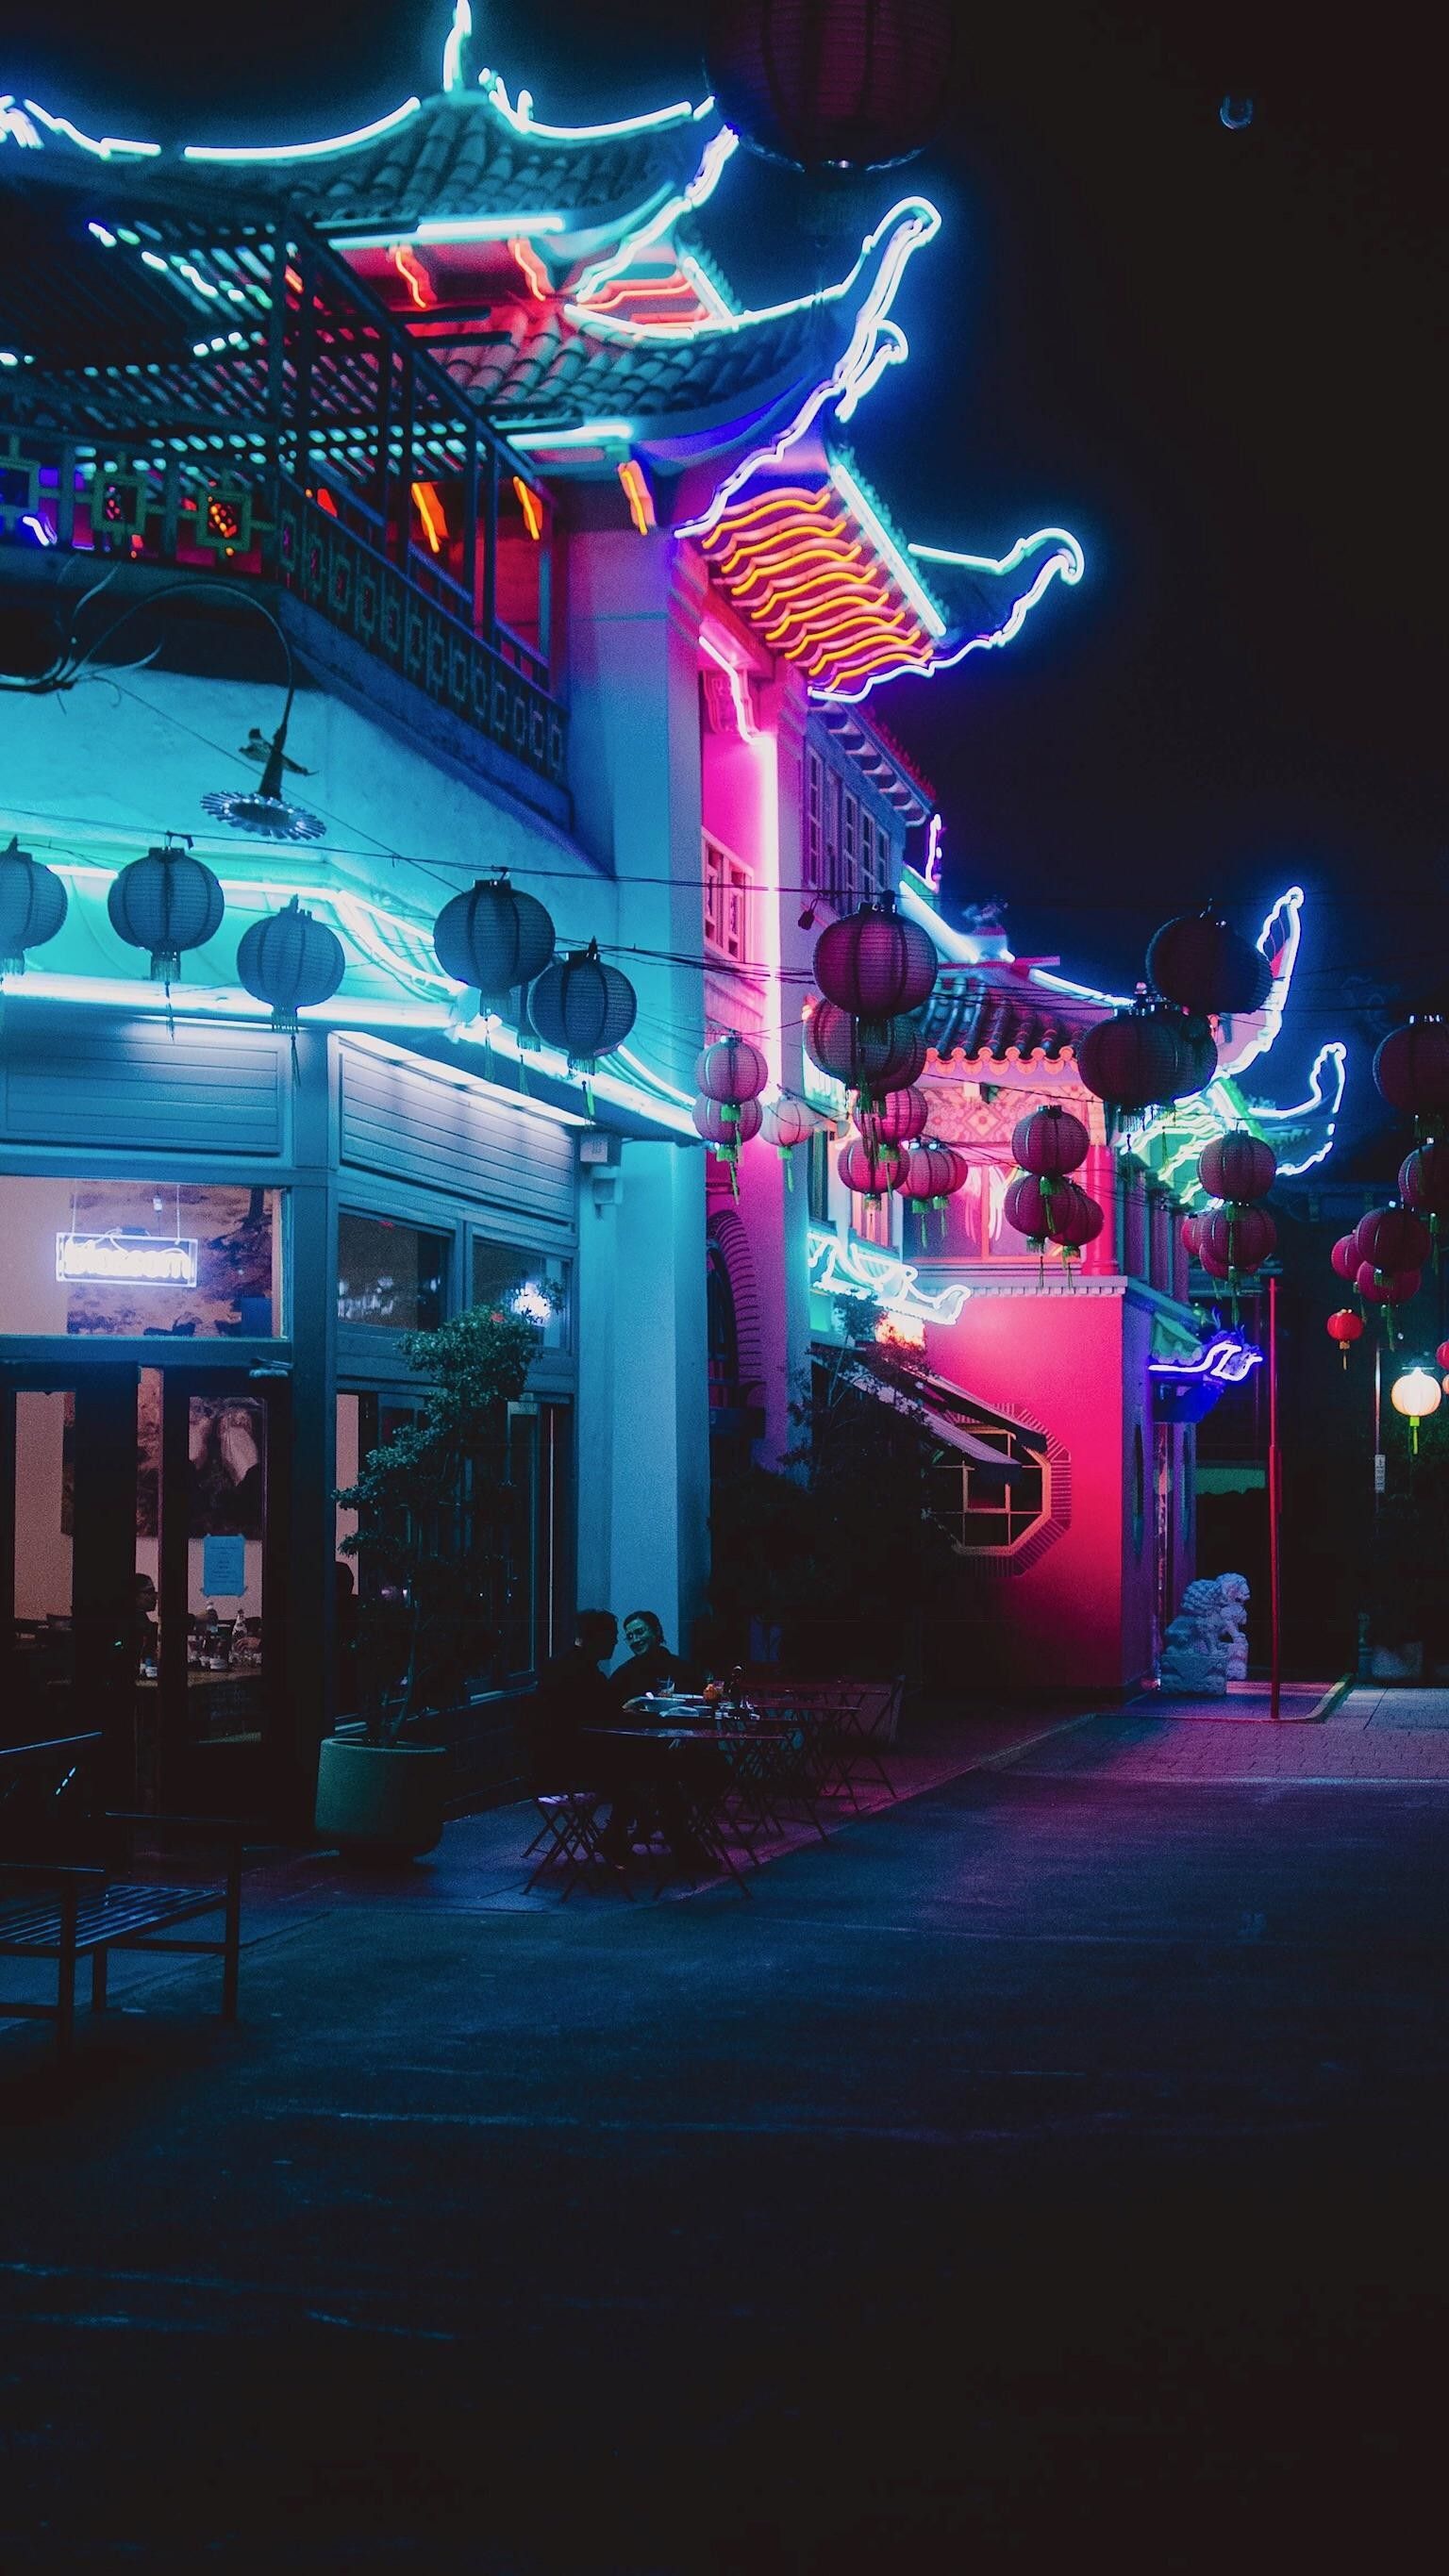 1000 Neon Japan Pictures  Download Free Images on Unsplash